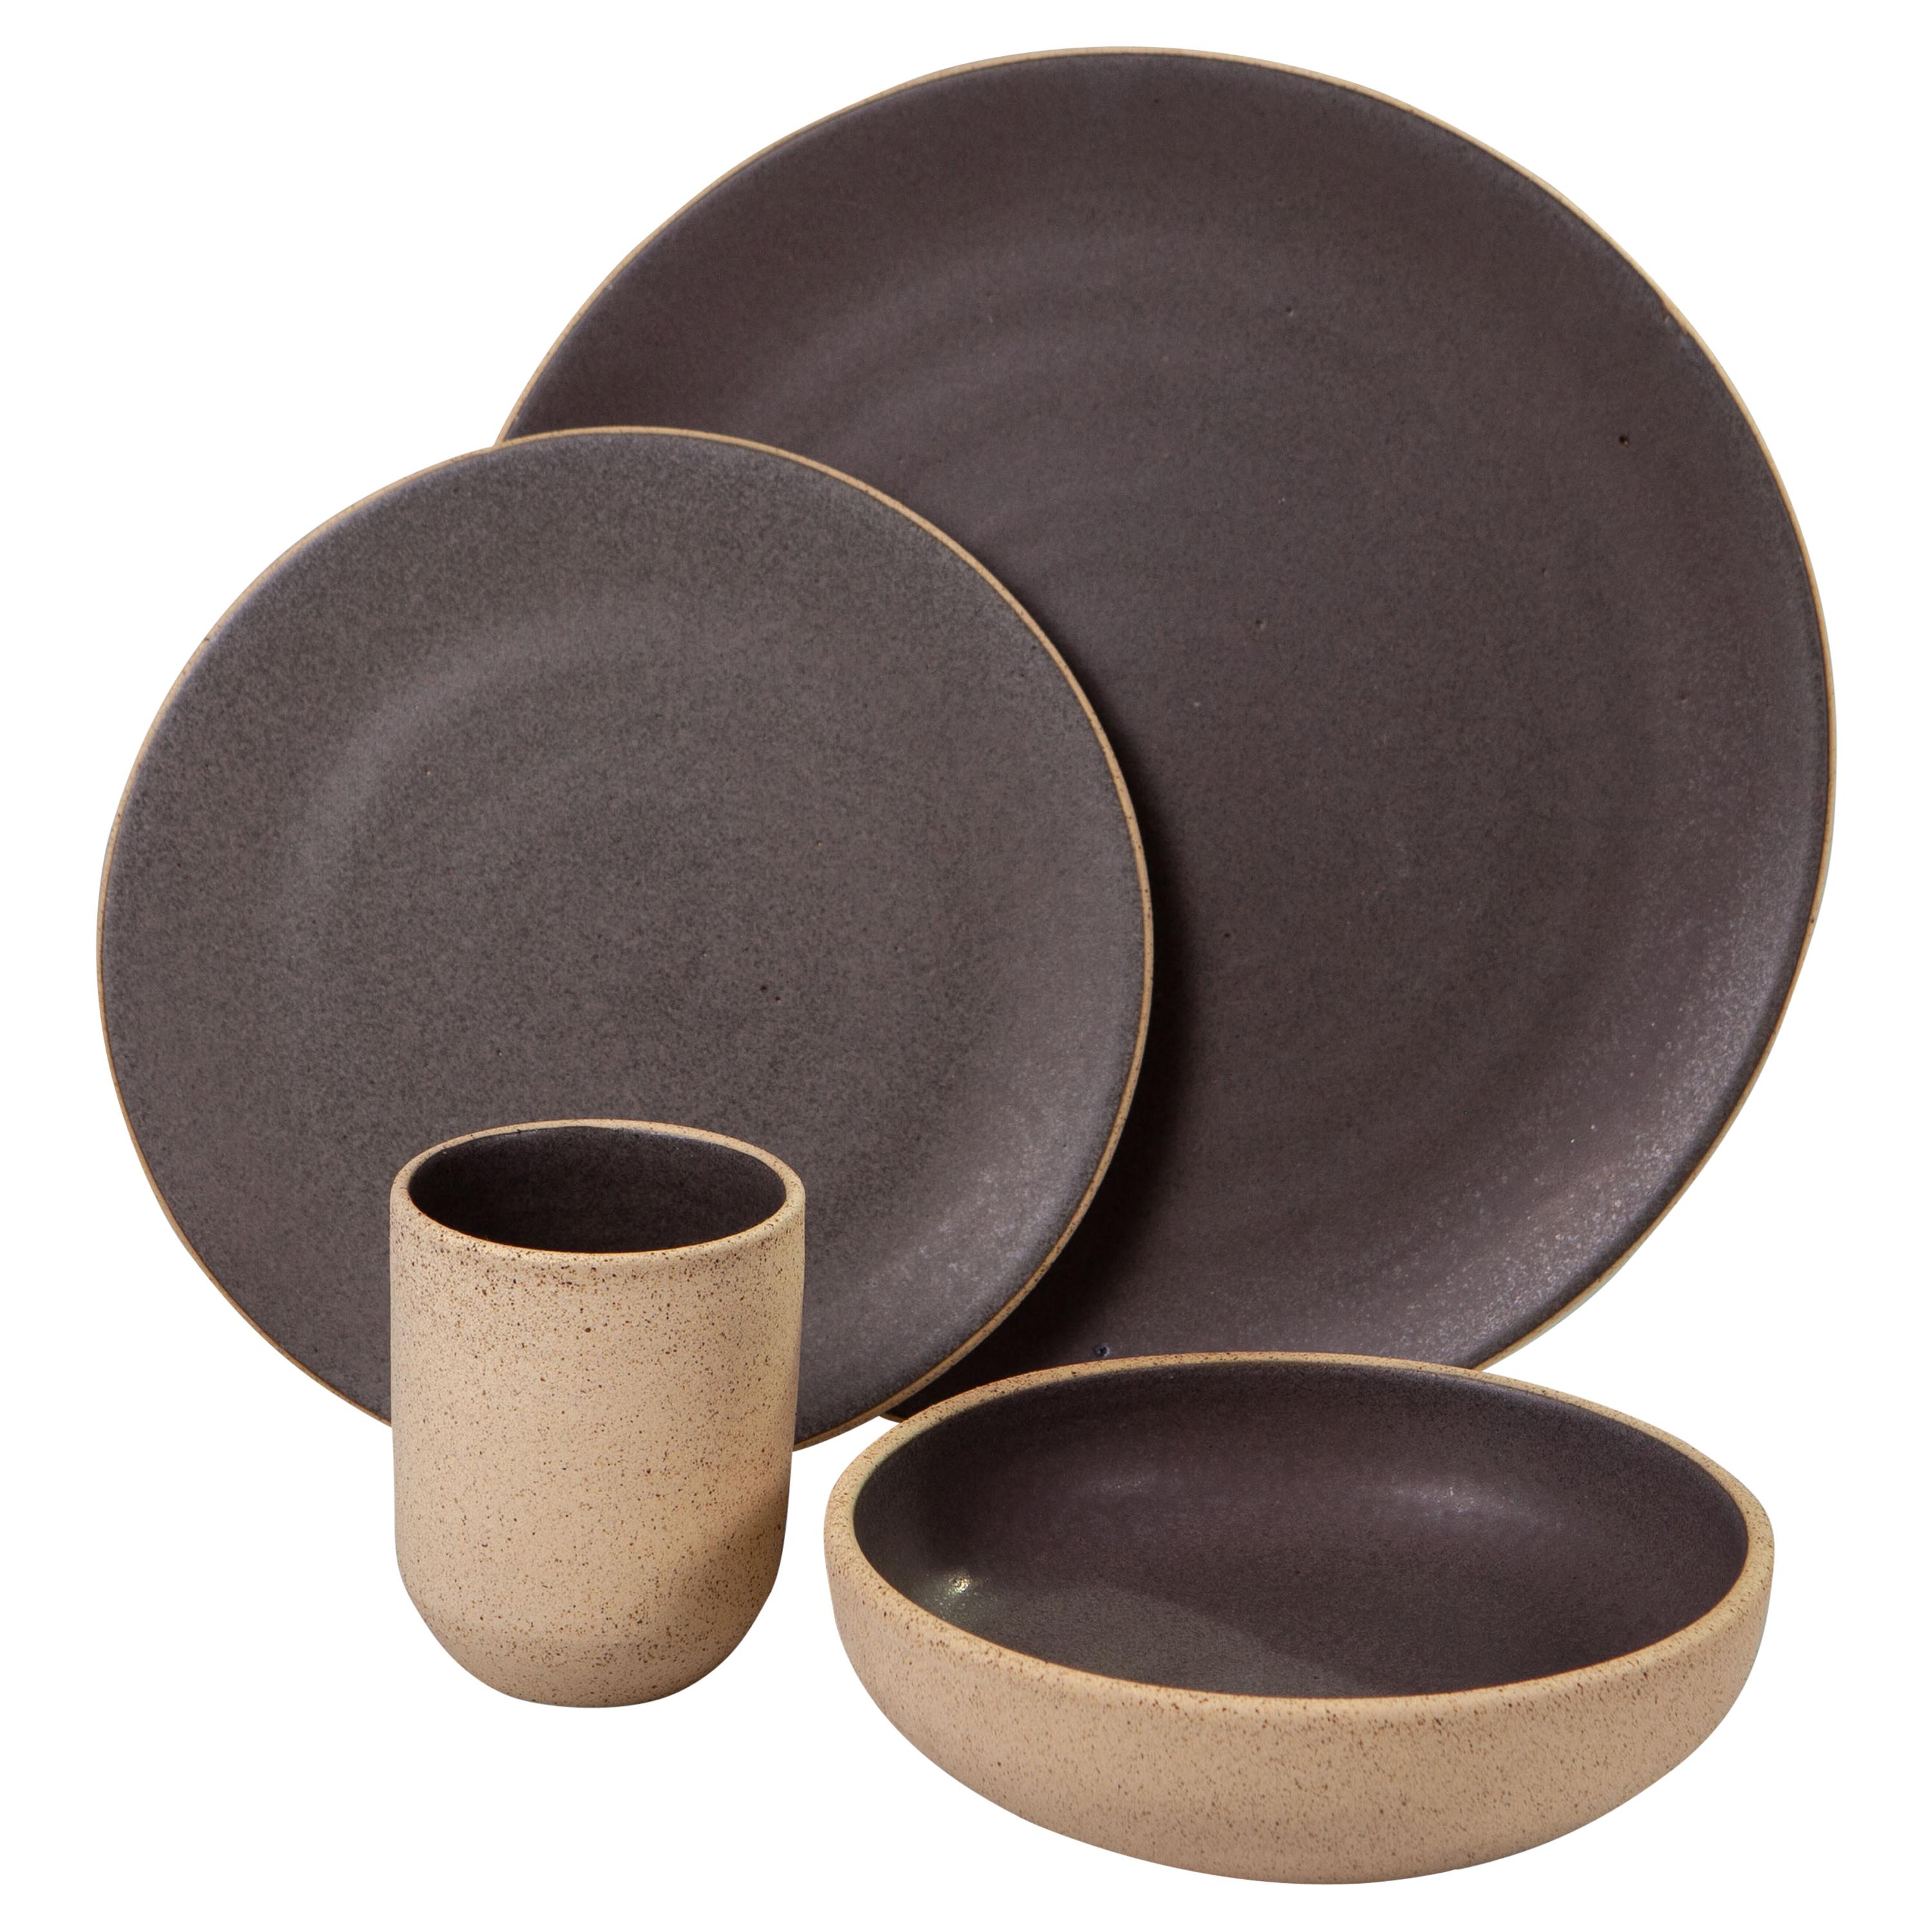 Handmade Ceramic Stoneware Four-Piece Place Setting in Grey, in Stock